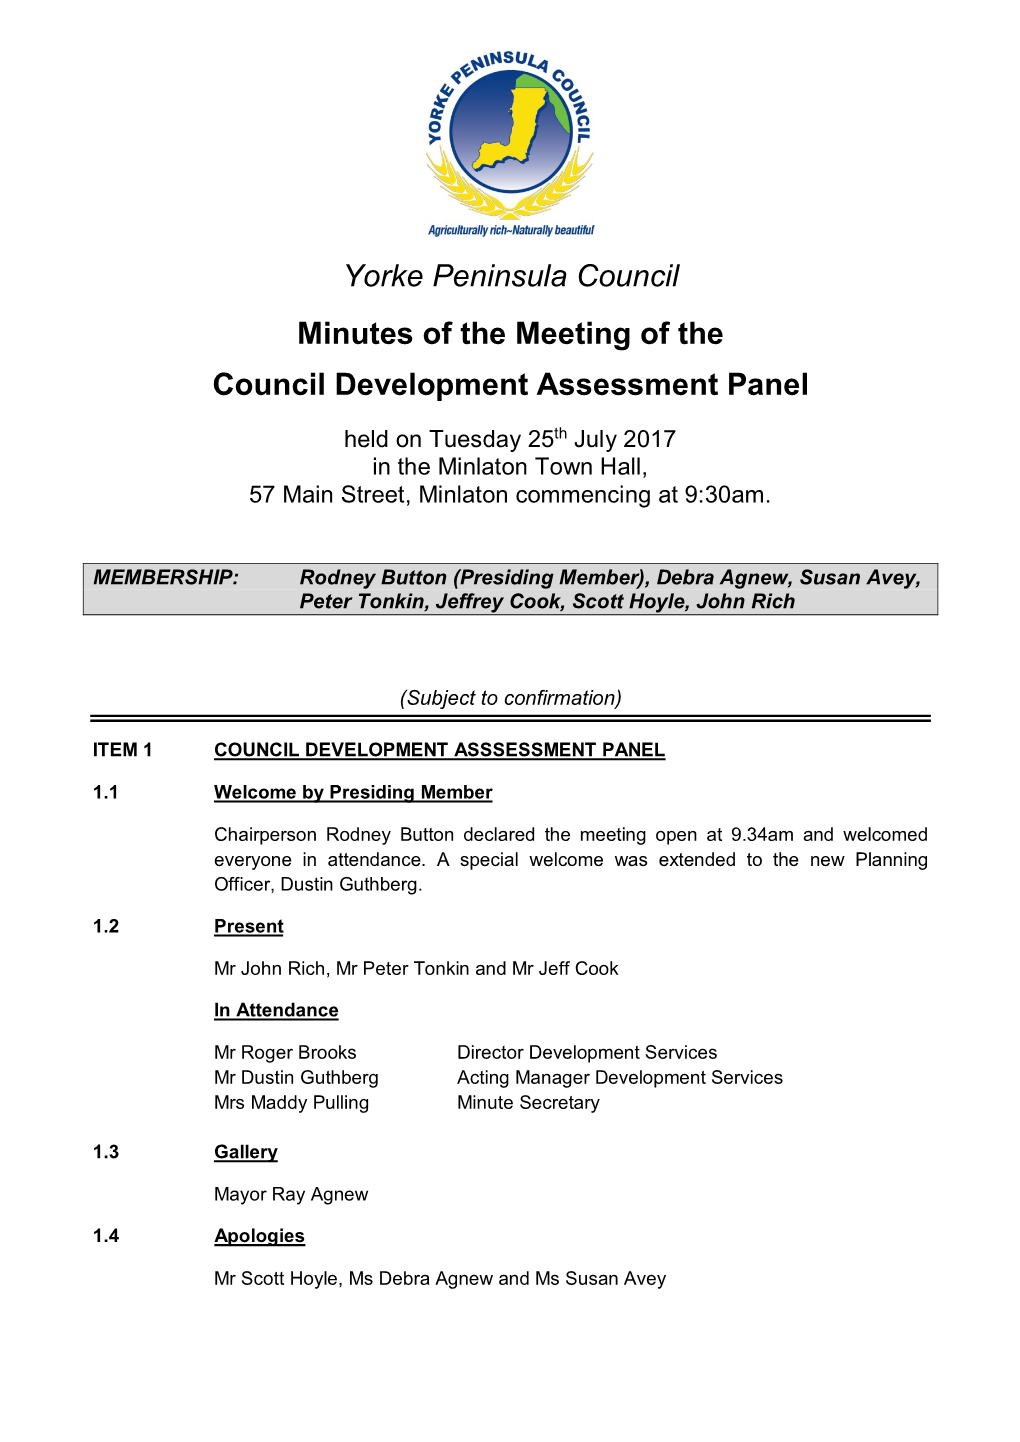 Yorke Peninsula Council Minutes of the Meeting of the Council Development Assessment Panel